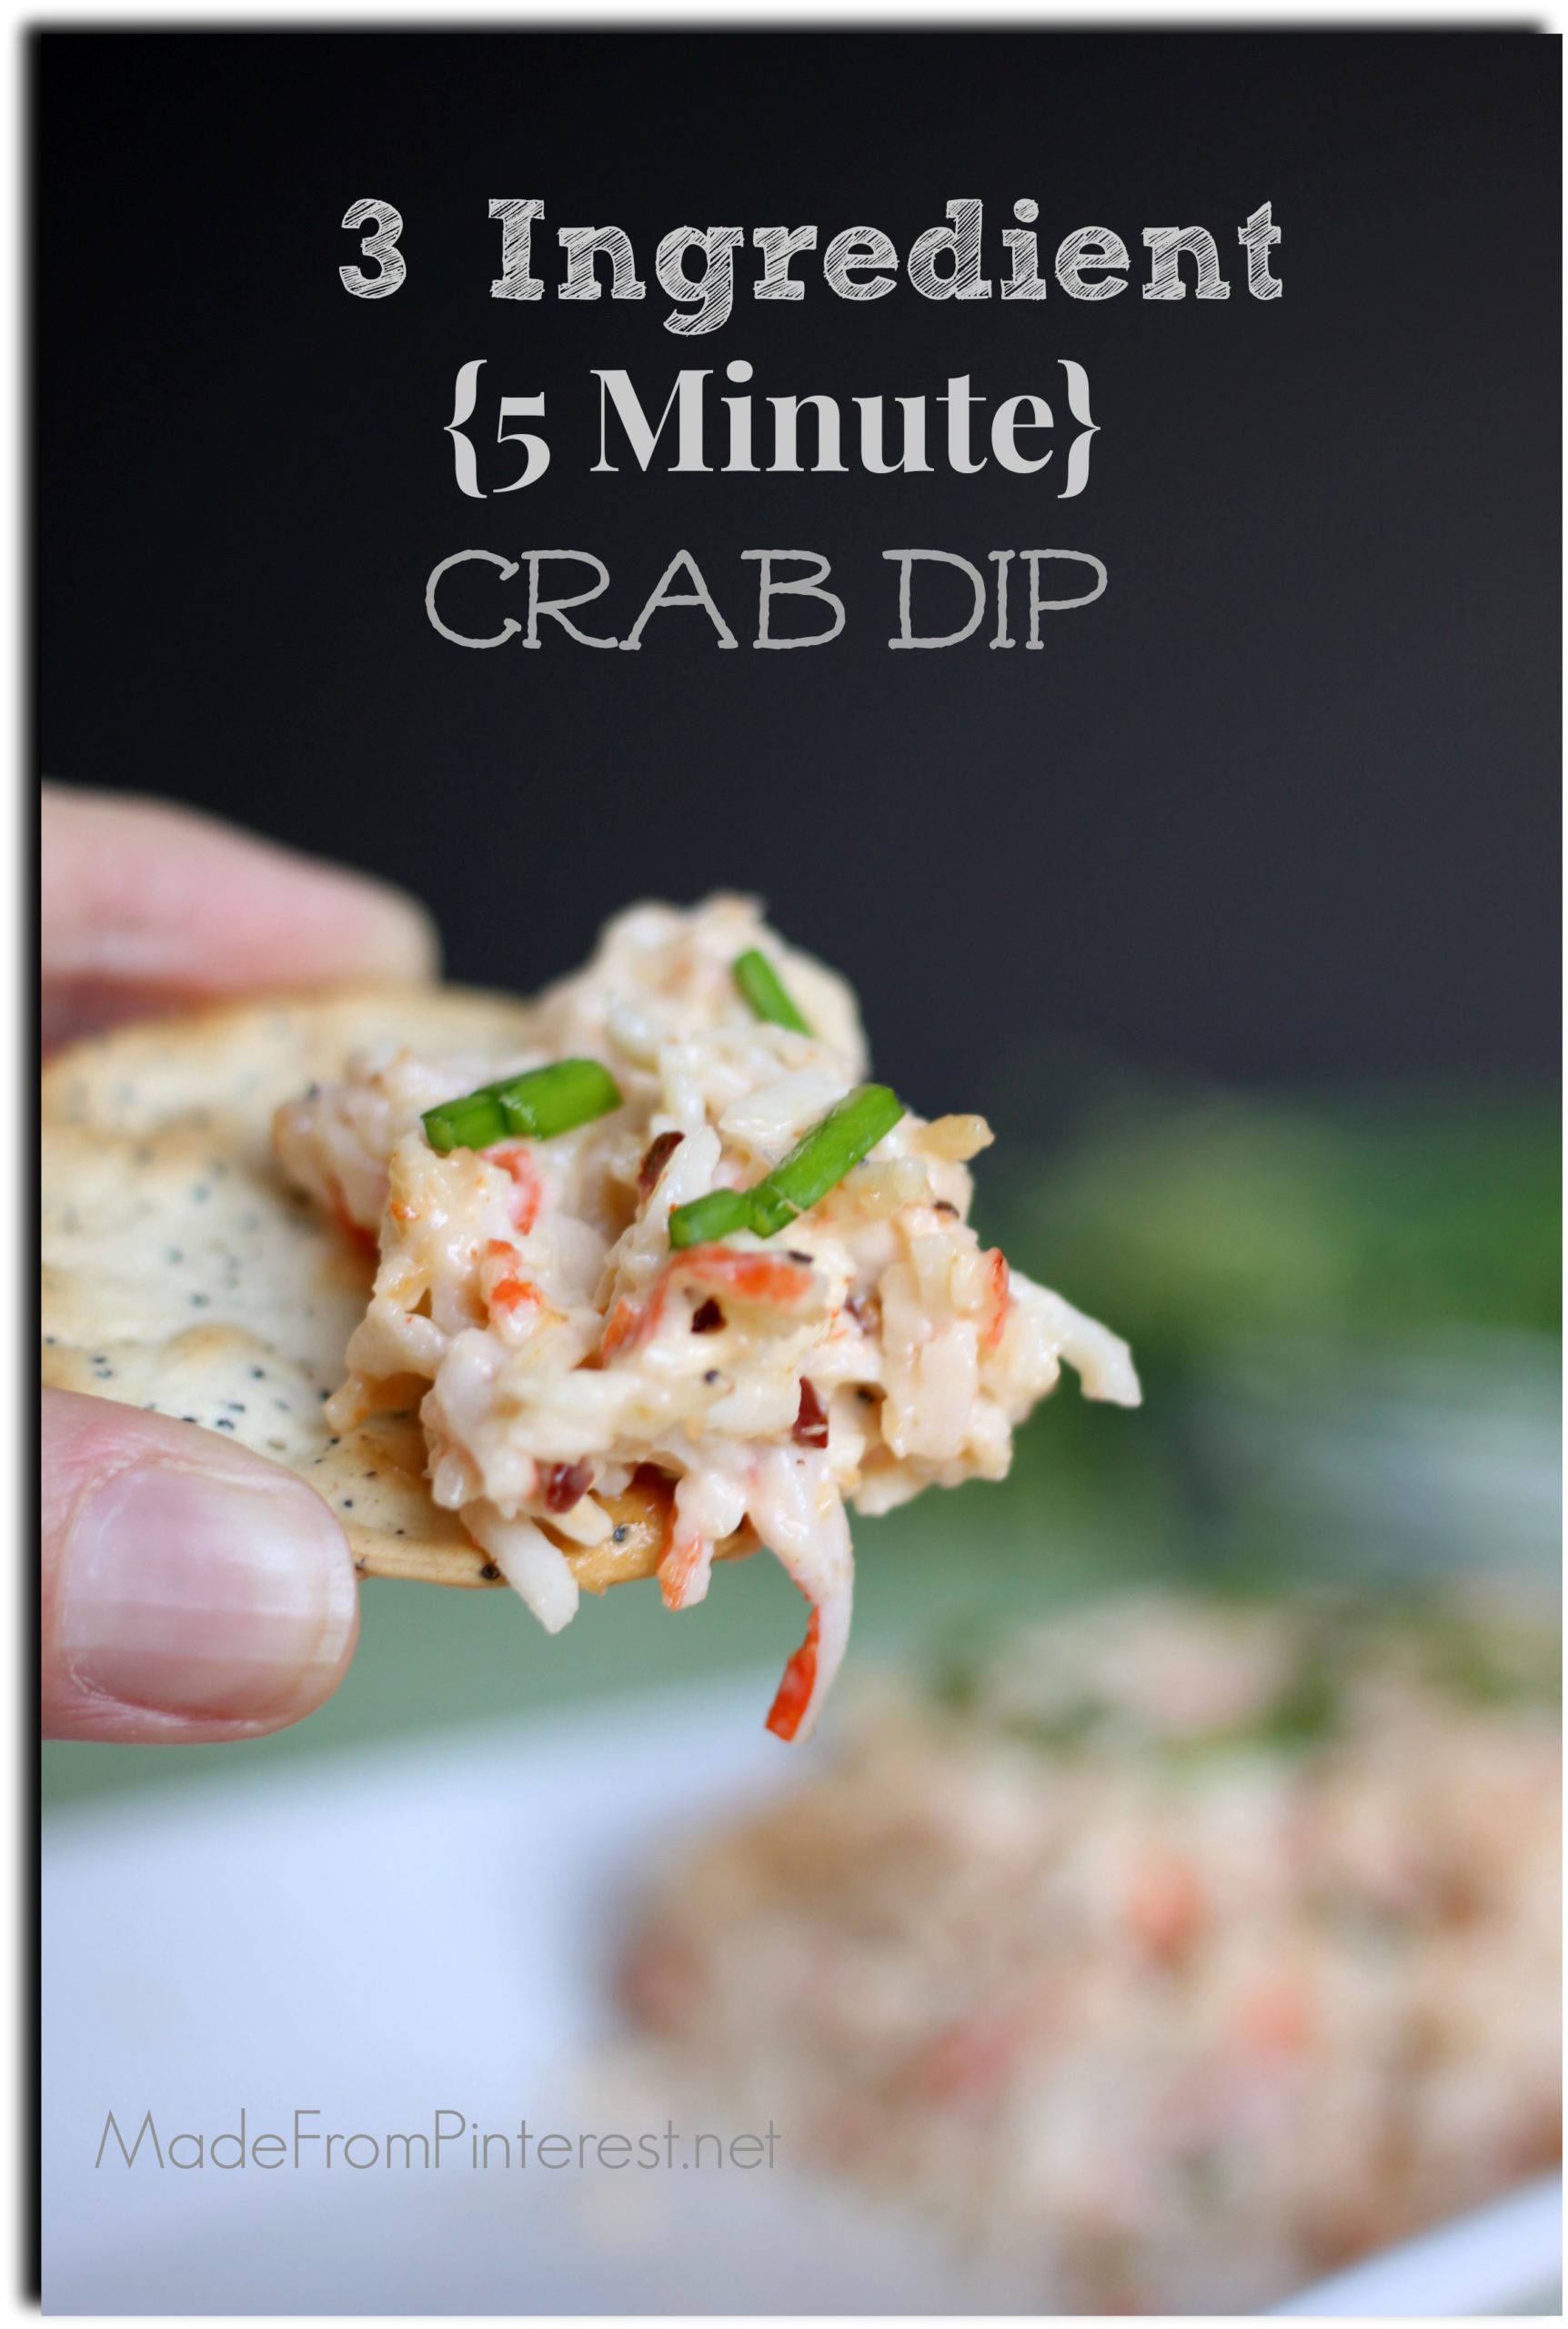 https://www.thisgrandmaisfun.com/wp-content/uploads/2014/01/3-ingredient-5-minute-Crab-Dip-with-graphic-scaled.jpg